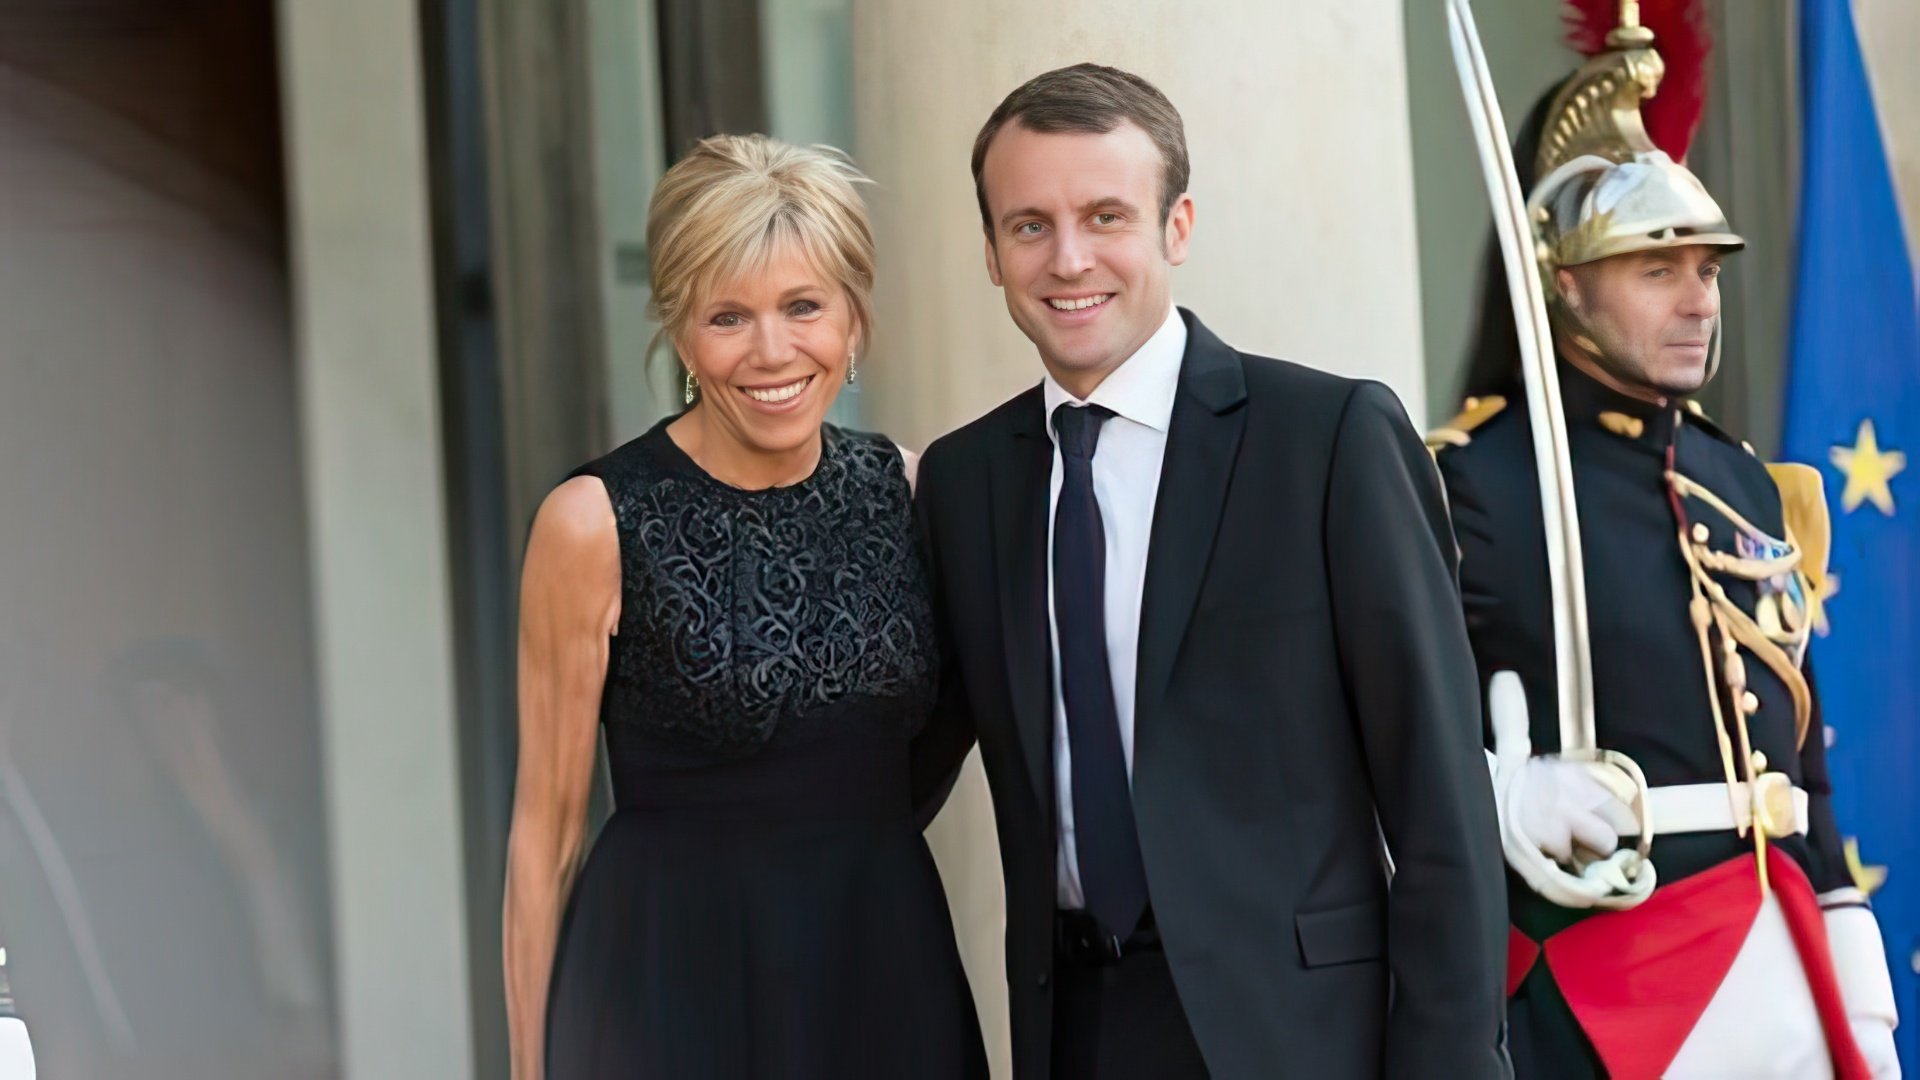 Pictured: Emmanuel Macron with his wife, Brigitte Macron